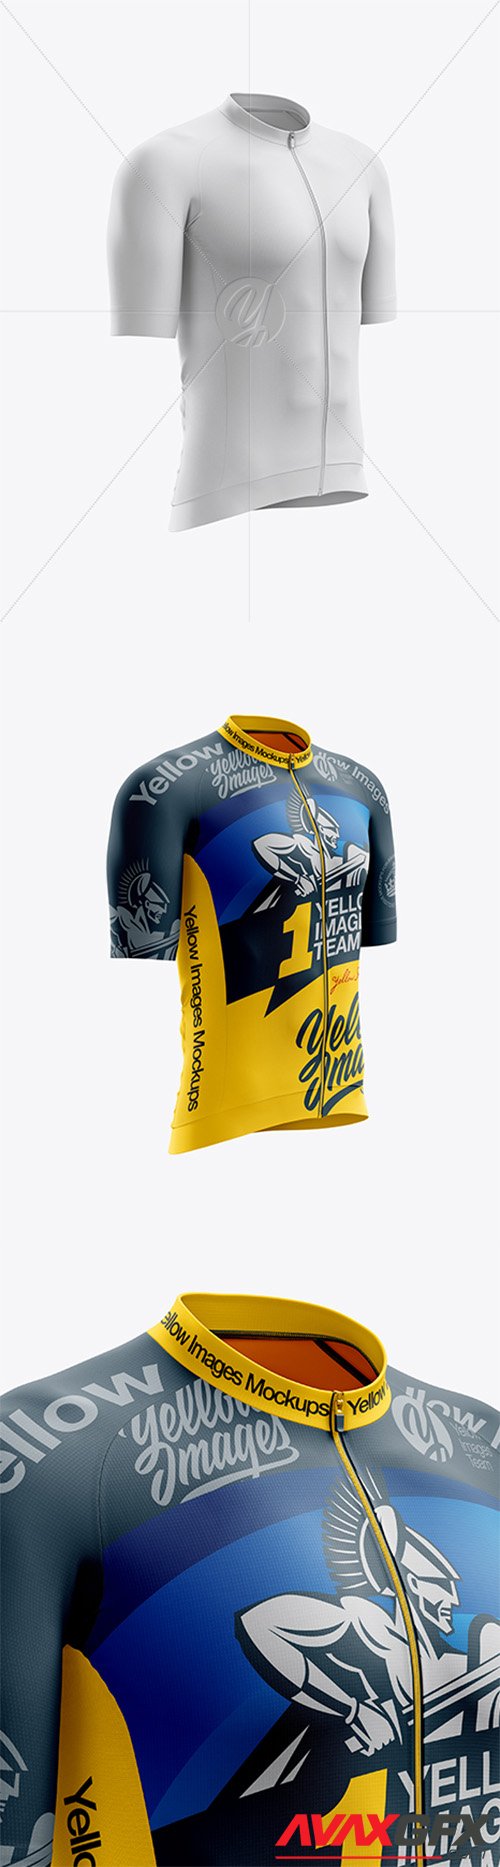 Download 16+ Mens Full Cycling Kit Mockup Front View Images ...